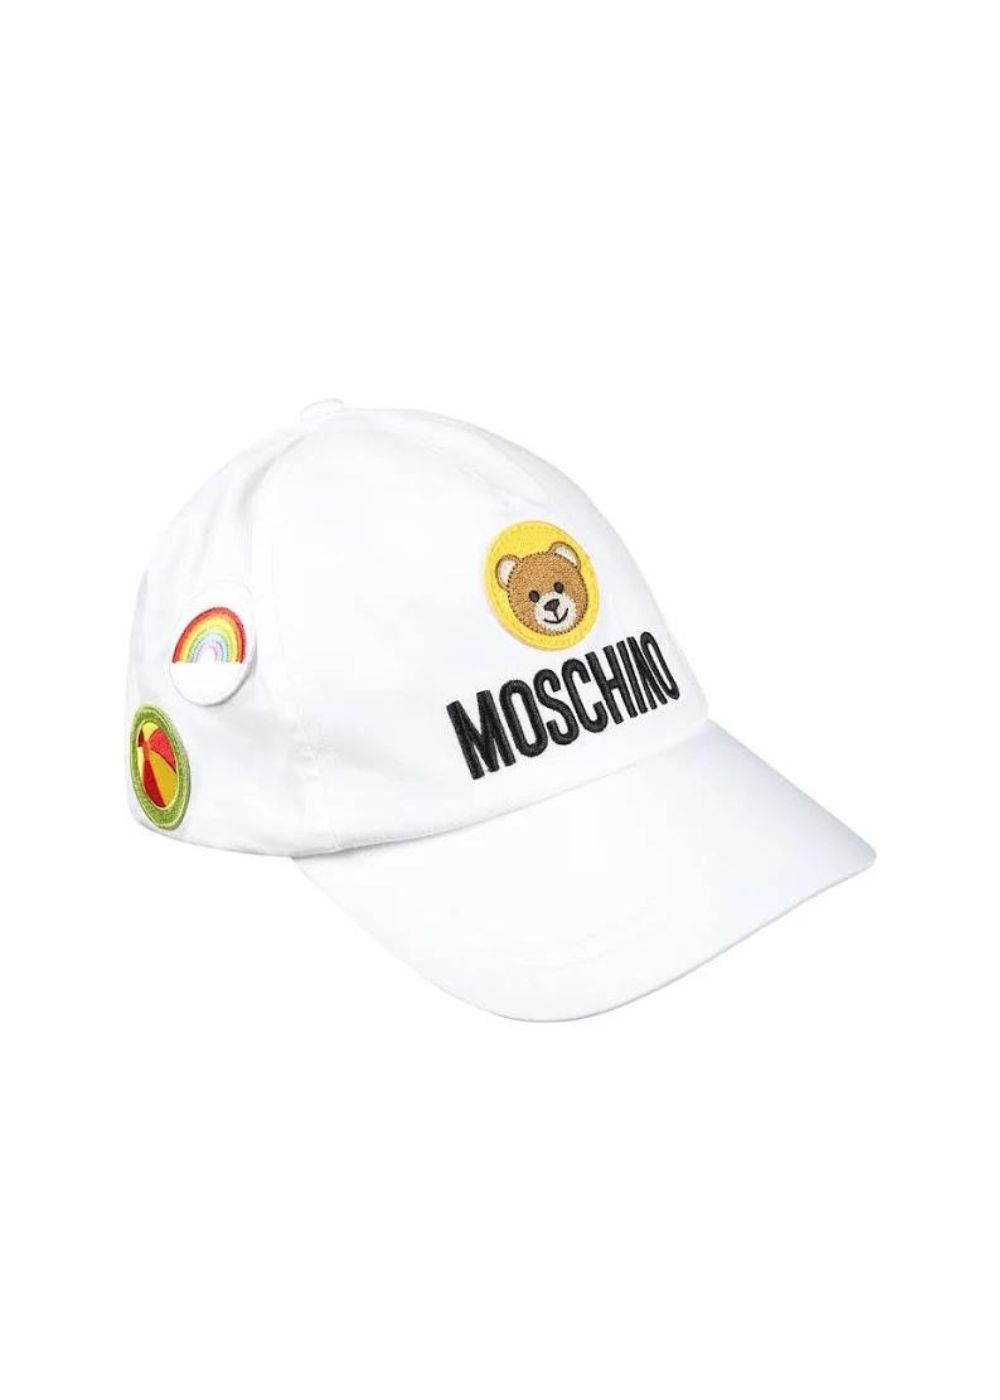 Featured image for “Moschino Cappello con Patch”